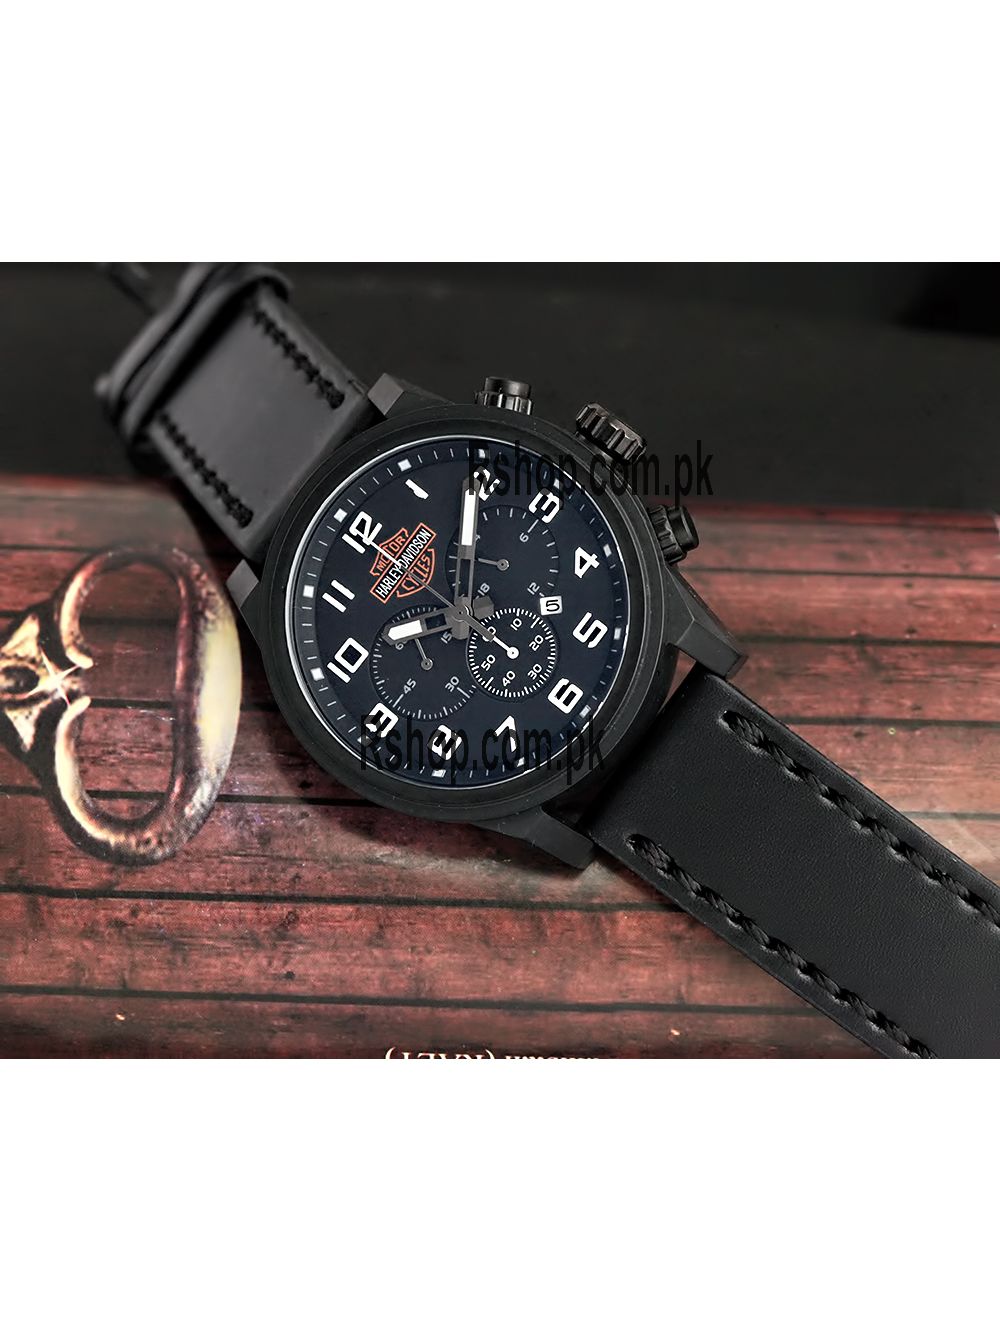 Harley Davidson Chronograph Watches In Pakistan Harley Davidson Chronograph Watch Price In Pakistan